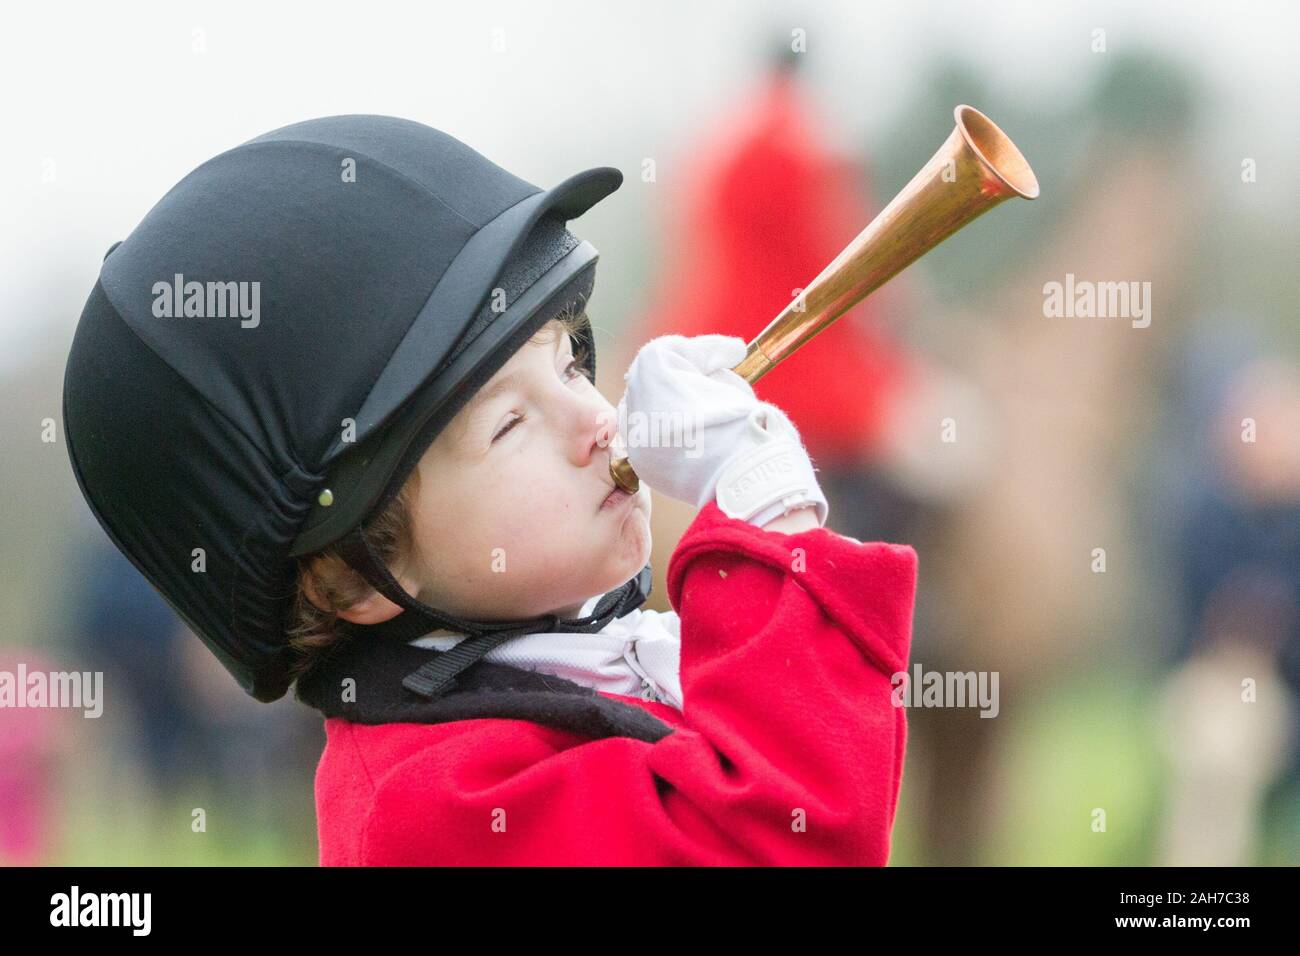 Hagley, Worcestershire, UK. 26th December 2019. 6-year-old Henley Mills blows his horn on his pony Radish as the Albrighton and Woodland Hunt gathers at Hagley Hall on Boxing Day for its traditional annual meet. Peter Lopeman/Alamy Live News Stock Photo